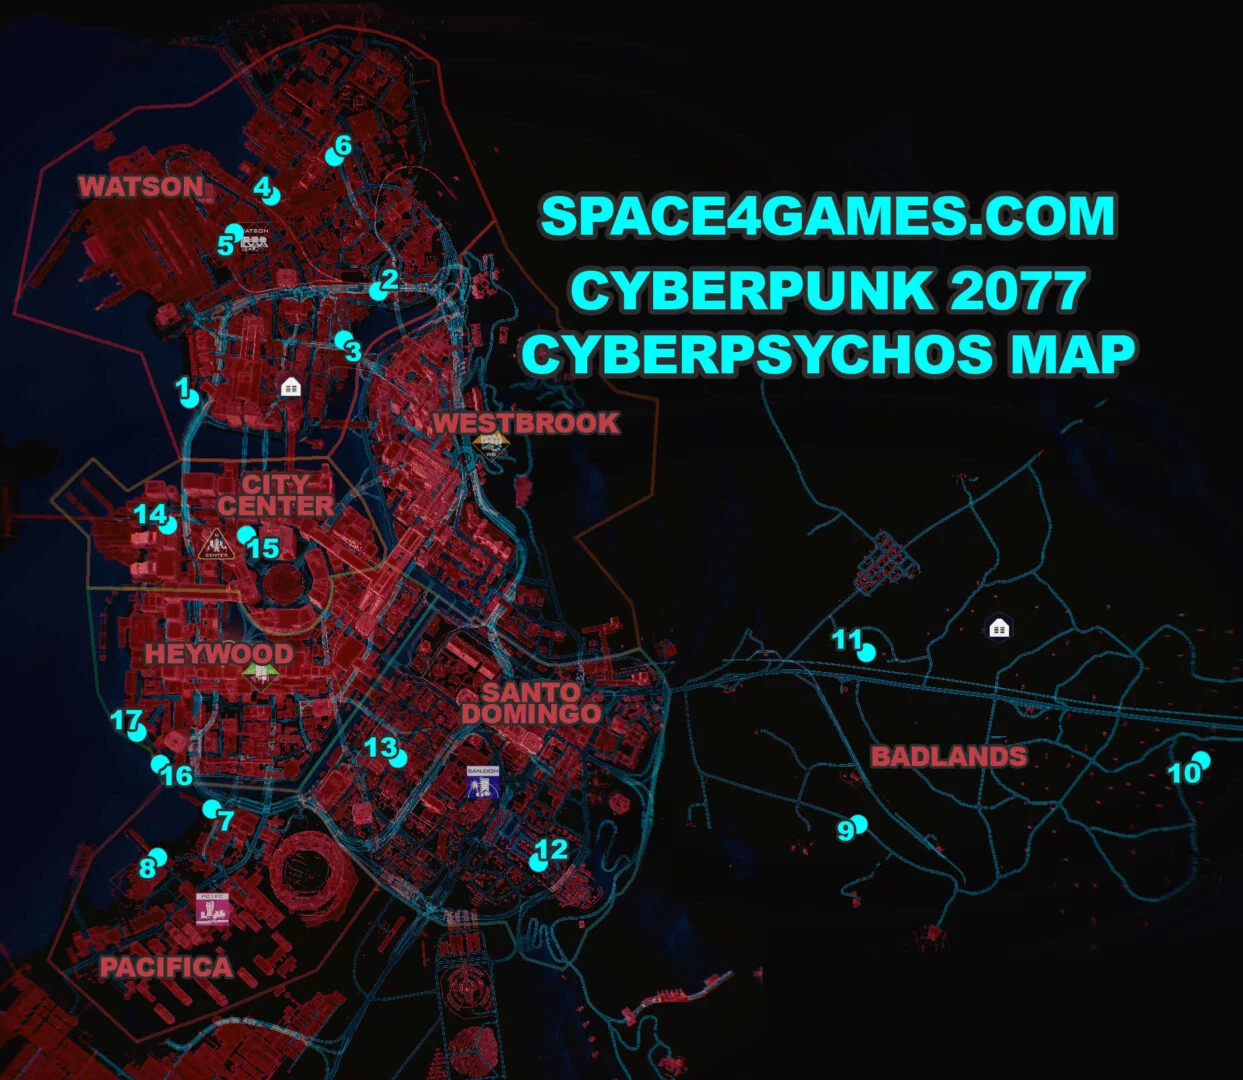 Cyberpunk 2077 Cyberpsycho Guide Locations of all Cyberpsychos Map